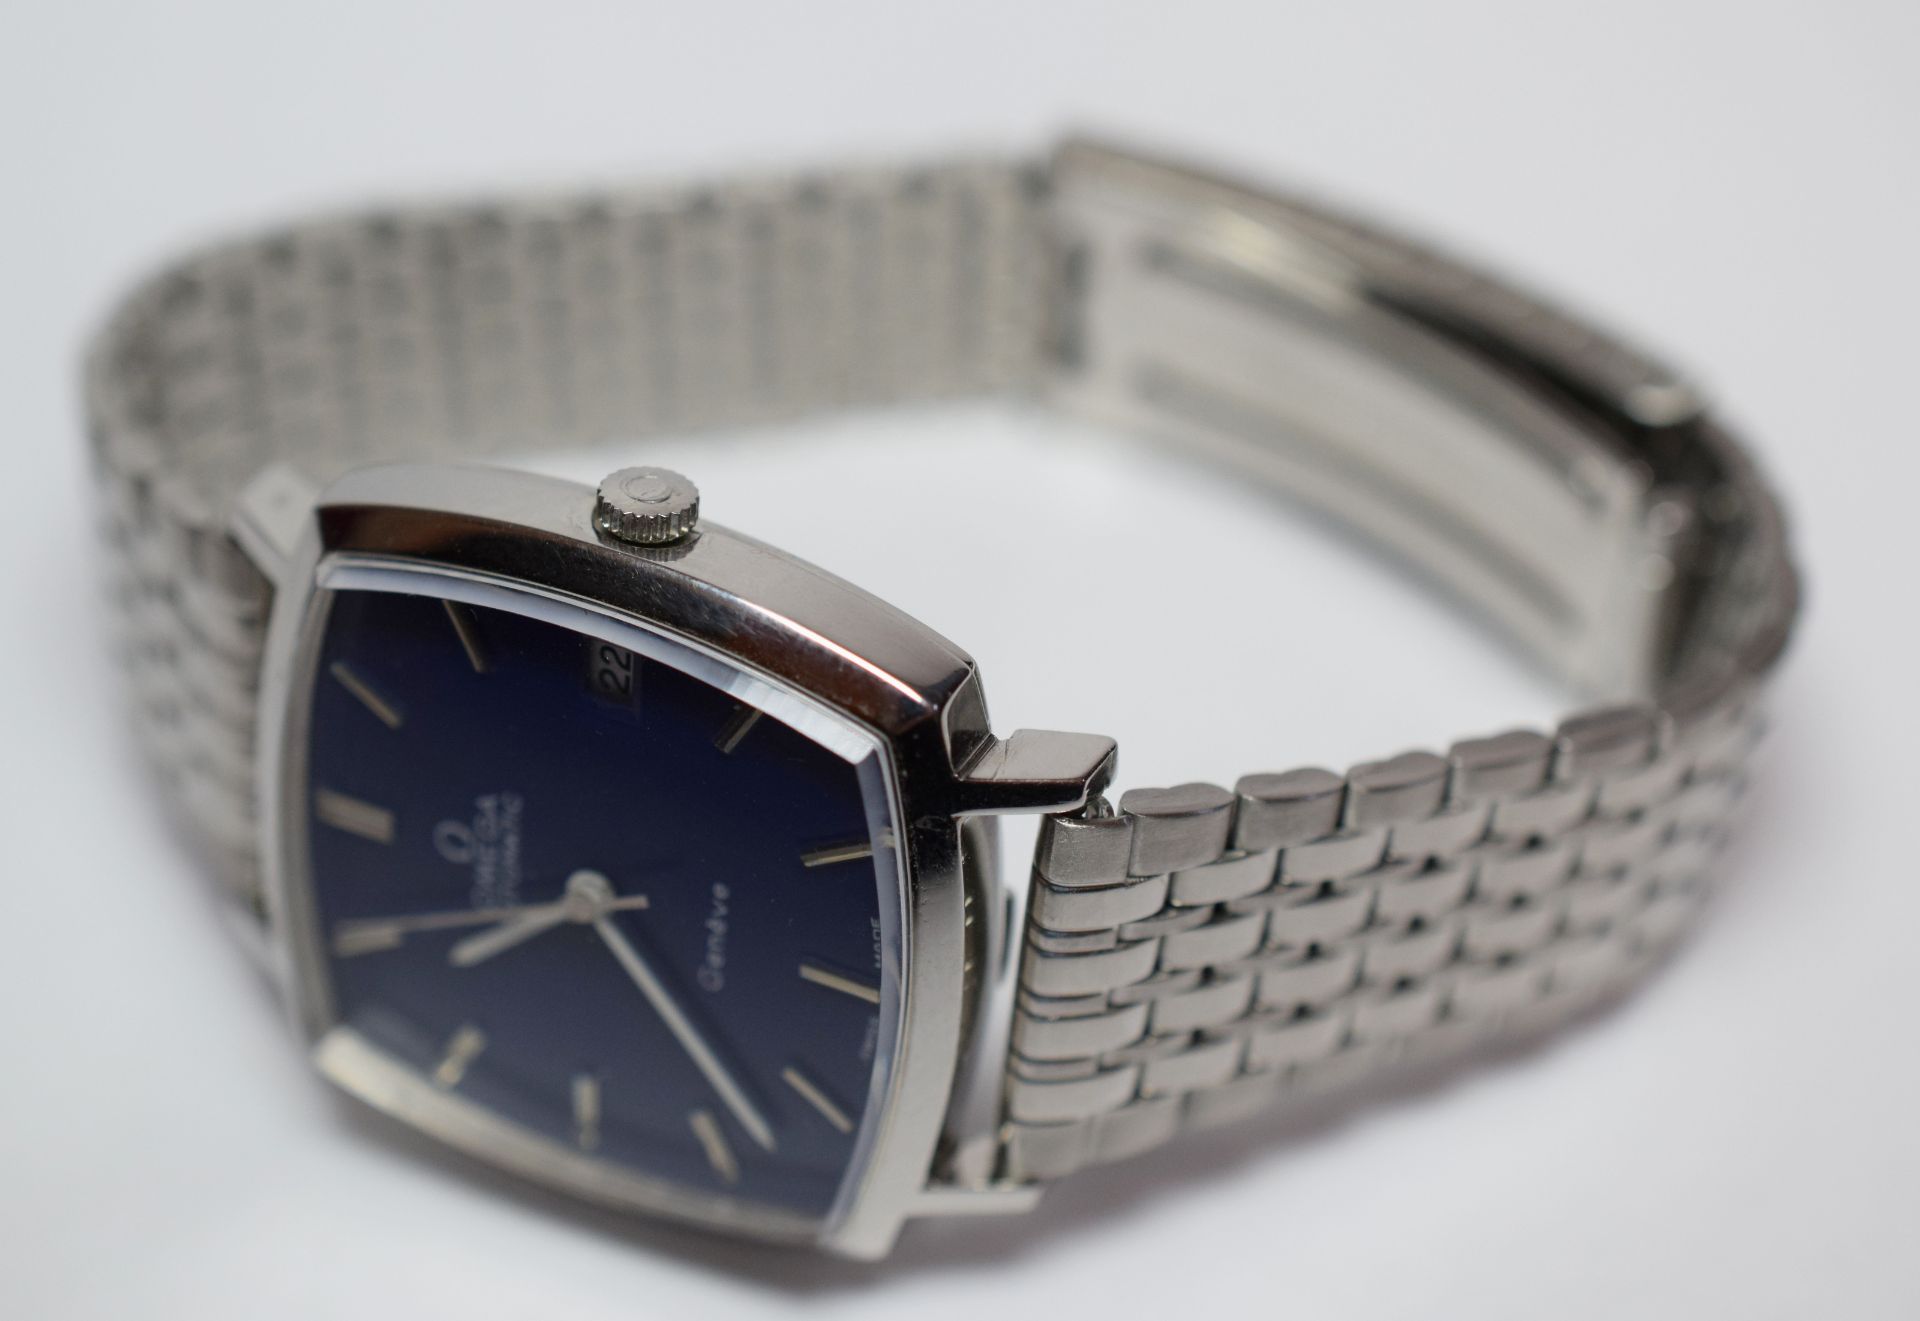 Omega Geneve ST162.0052 c.1973 With Stunning Blue Dial - Image 2 of 11